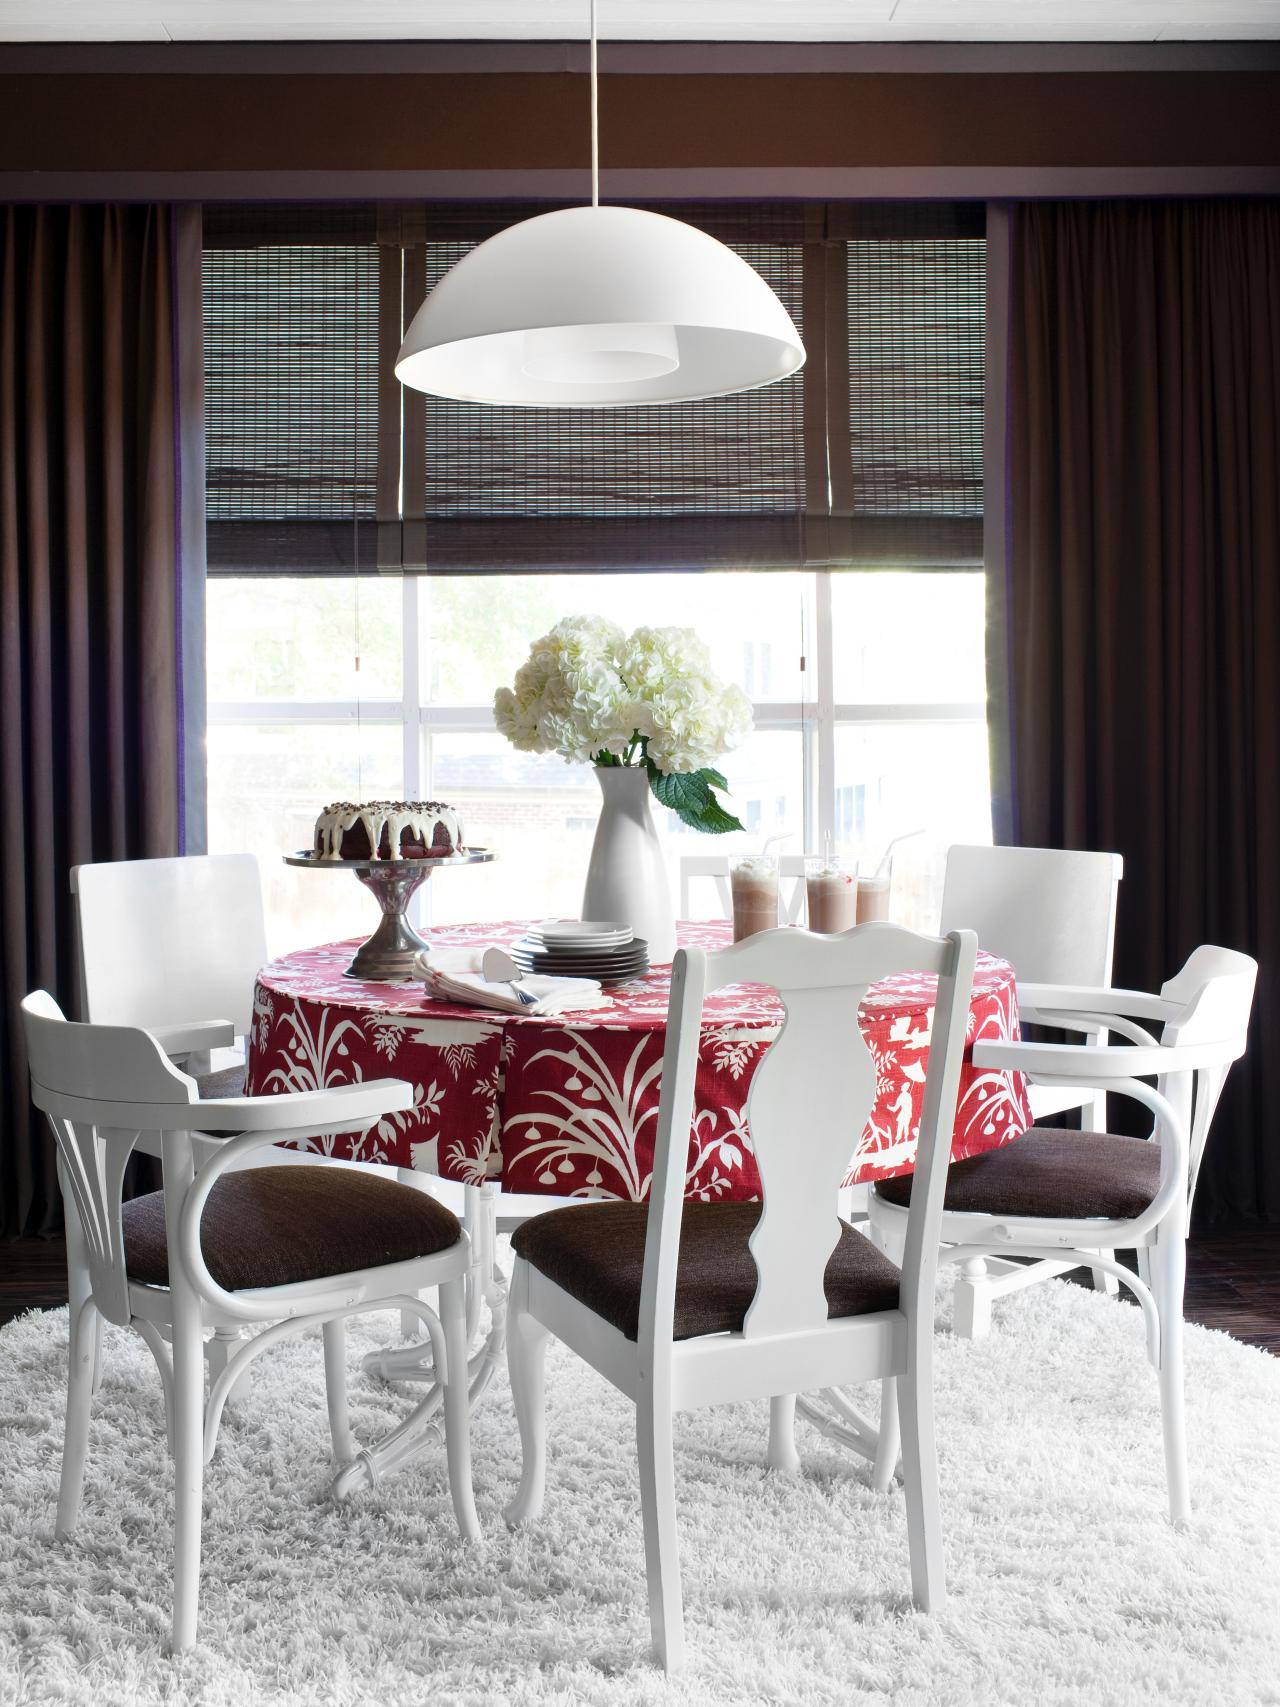 Paint Eclectic Chairs For A Cohesive, Best Type Of Paint For Dining Room Chairs